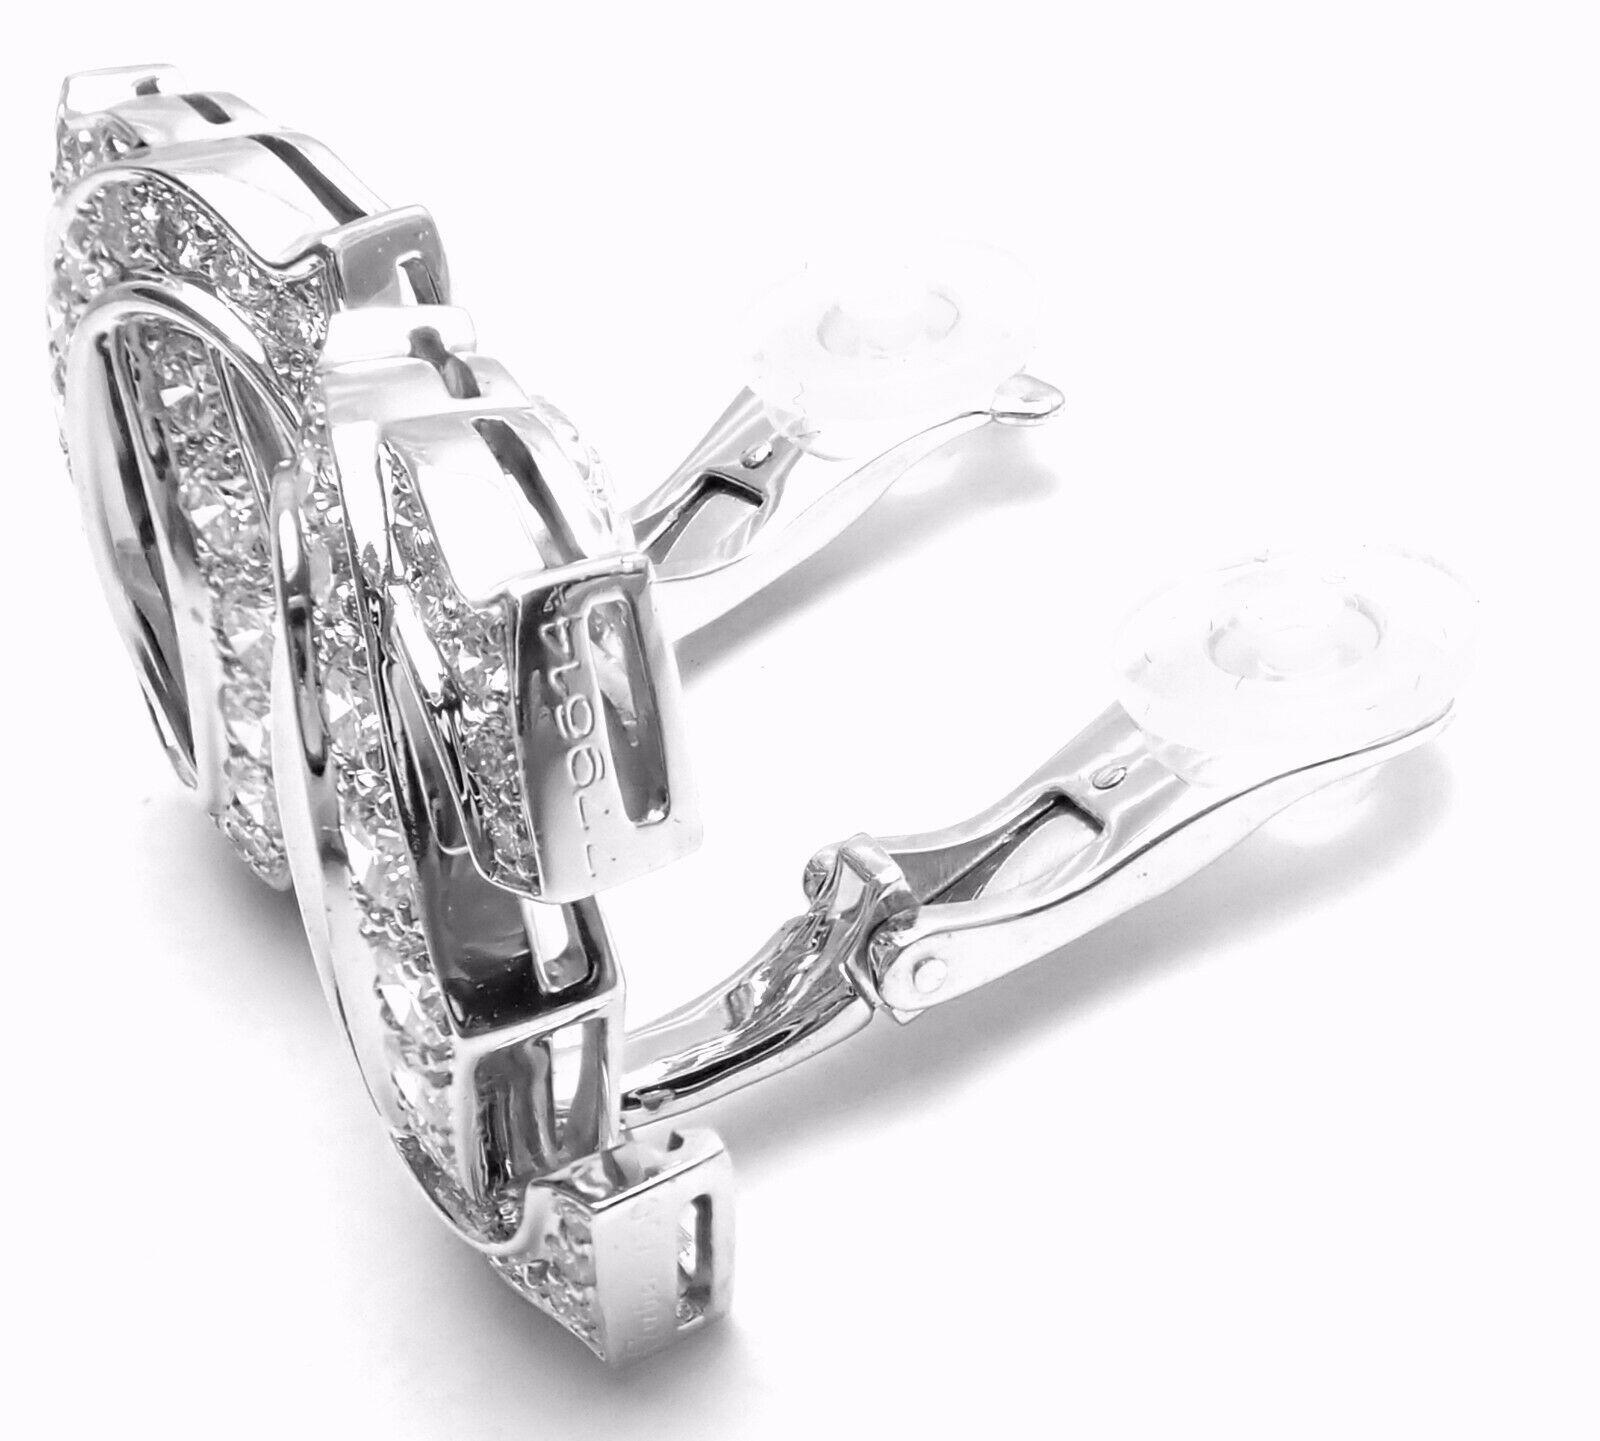 18k White Gold Diamond Large Penelope Double C earrings by Cartier. 
With 68 Round brilliant cut diamonds total weight approx 2.40ct. 
Diamonds VVS1 clarity, E color
****Earrings are made for non pierced ears
but they can be converted for pierced